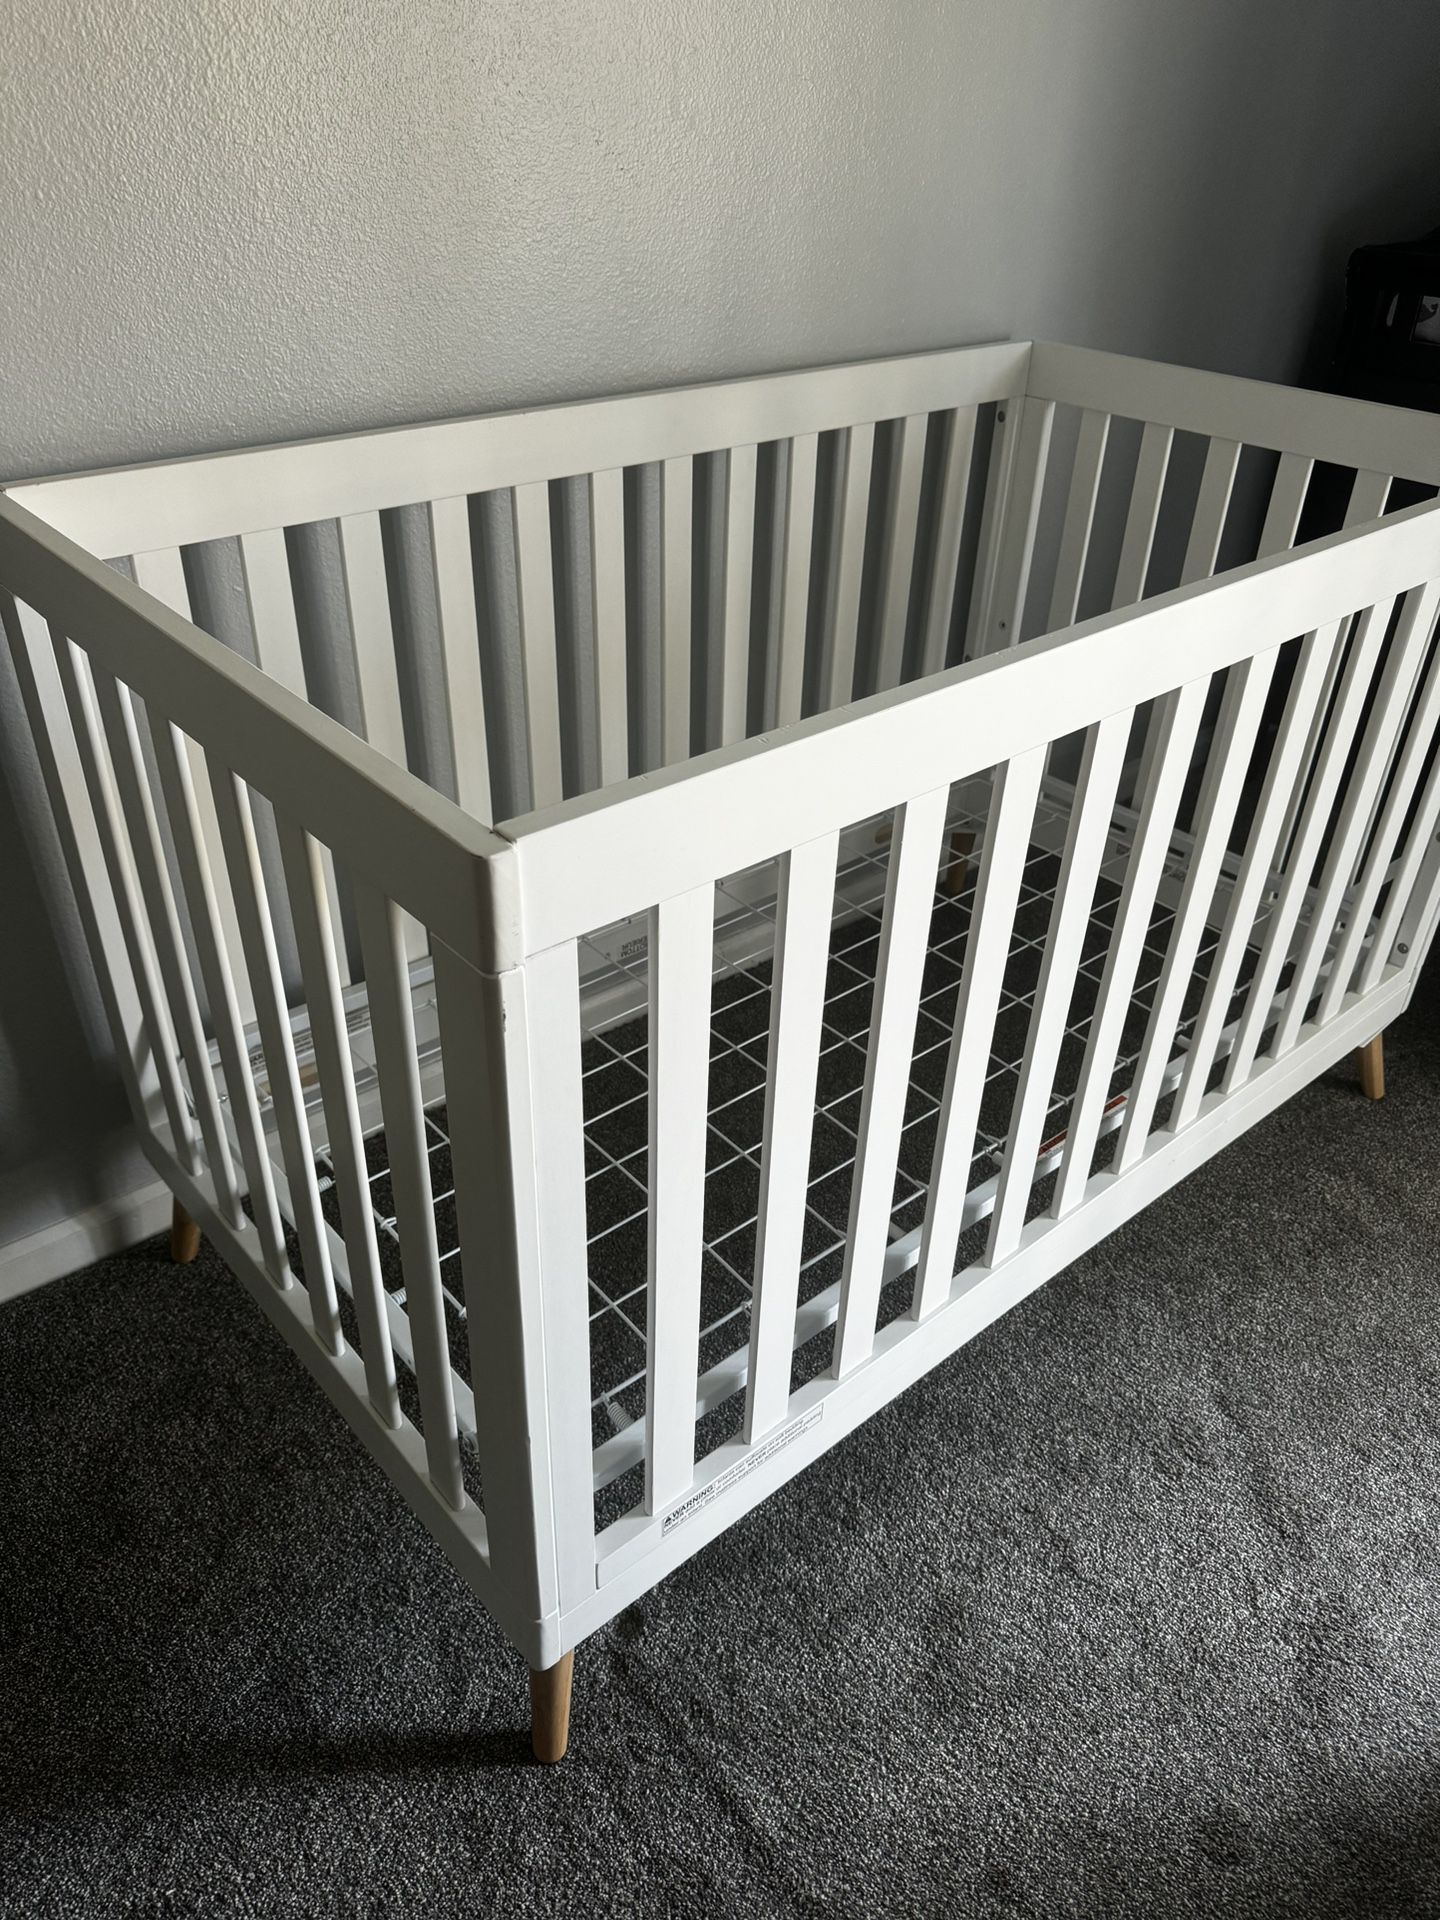 Crib and changing table 